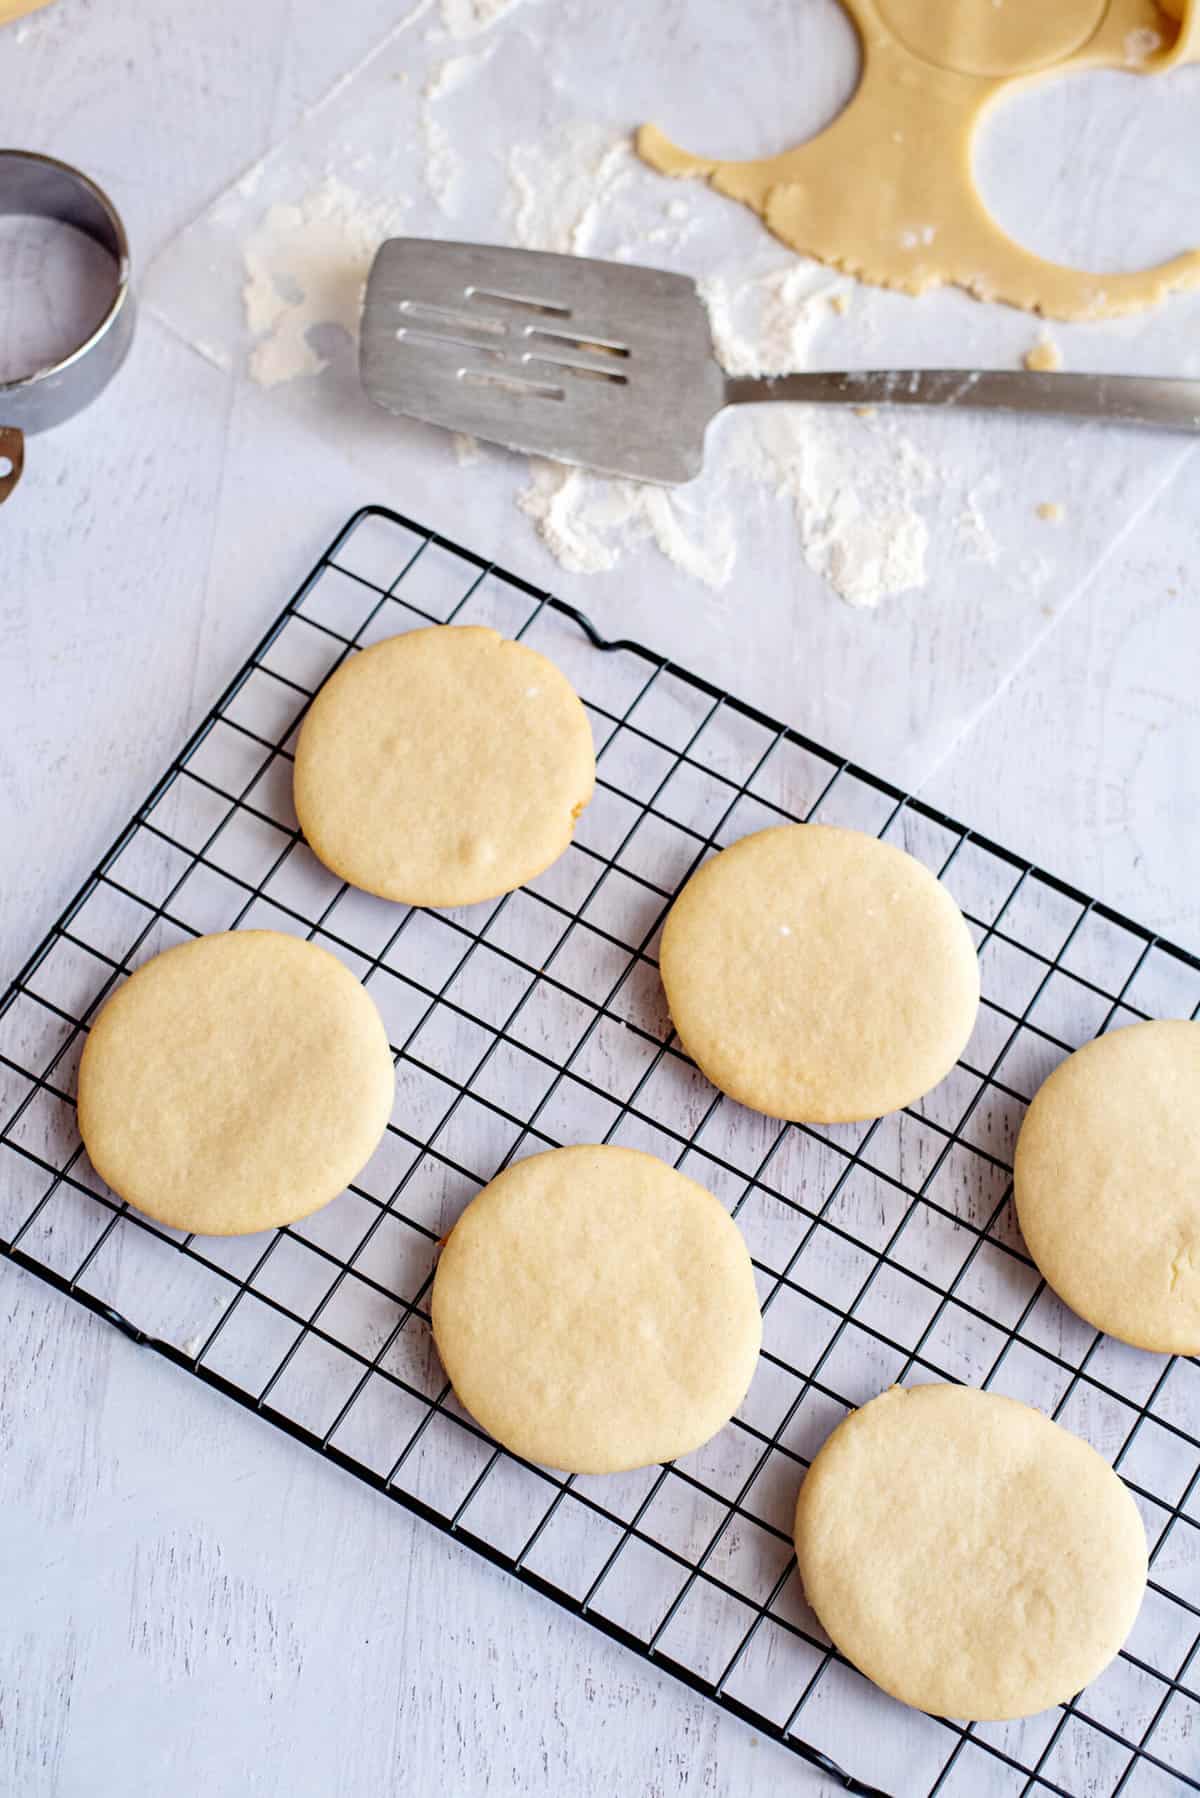 bake the Christmas cut out cookies